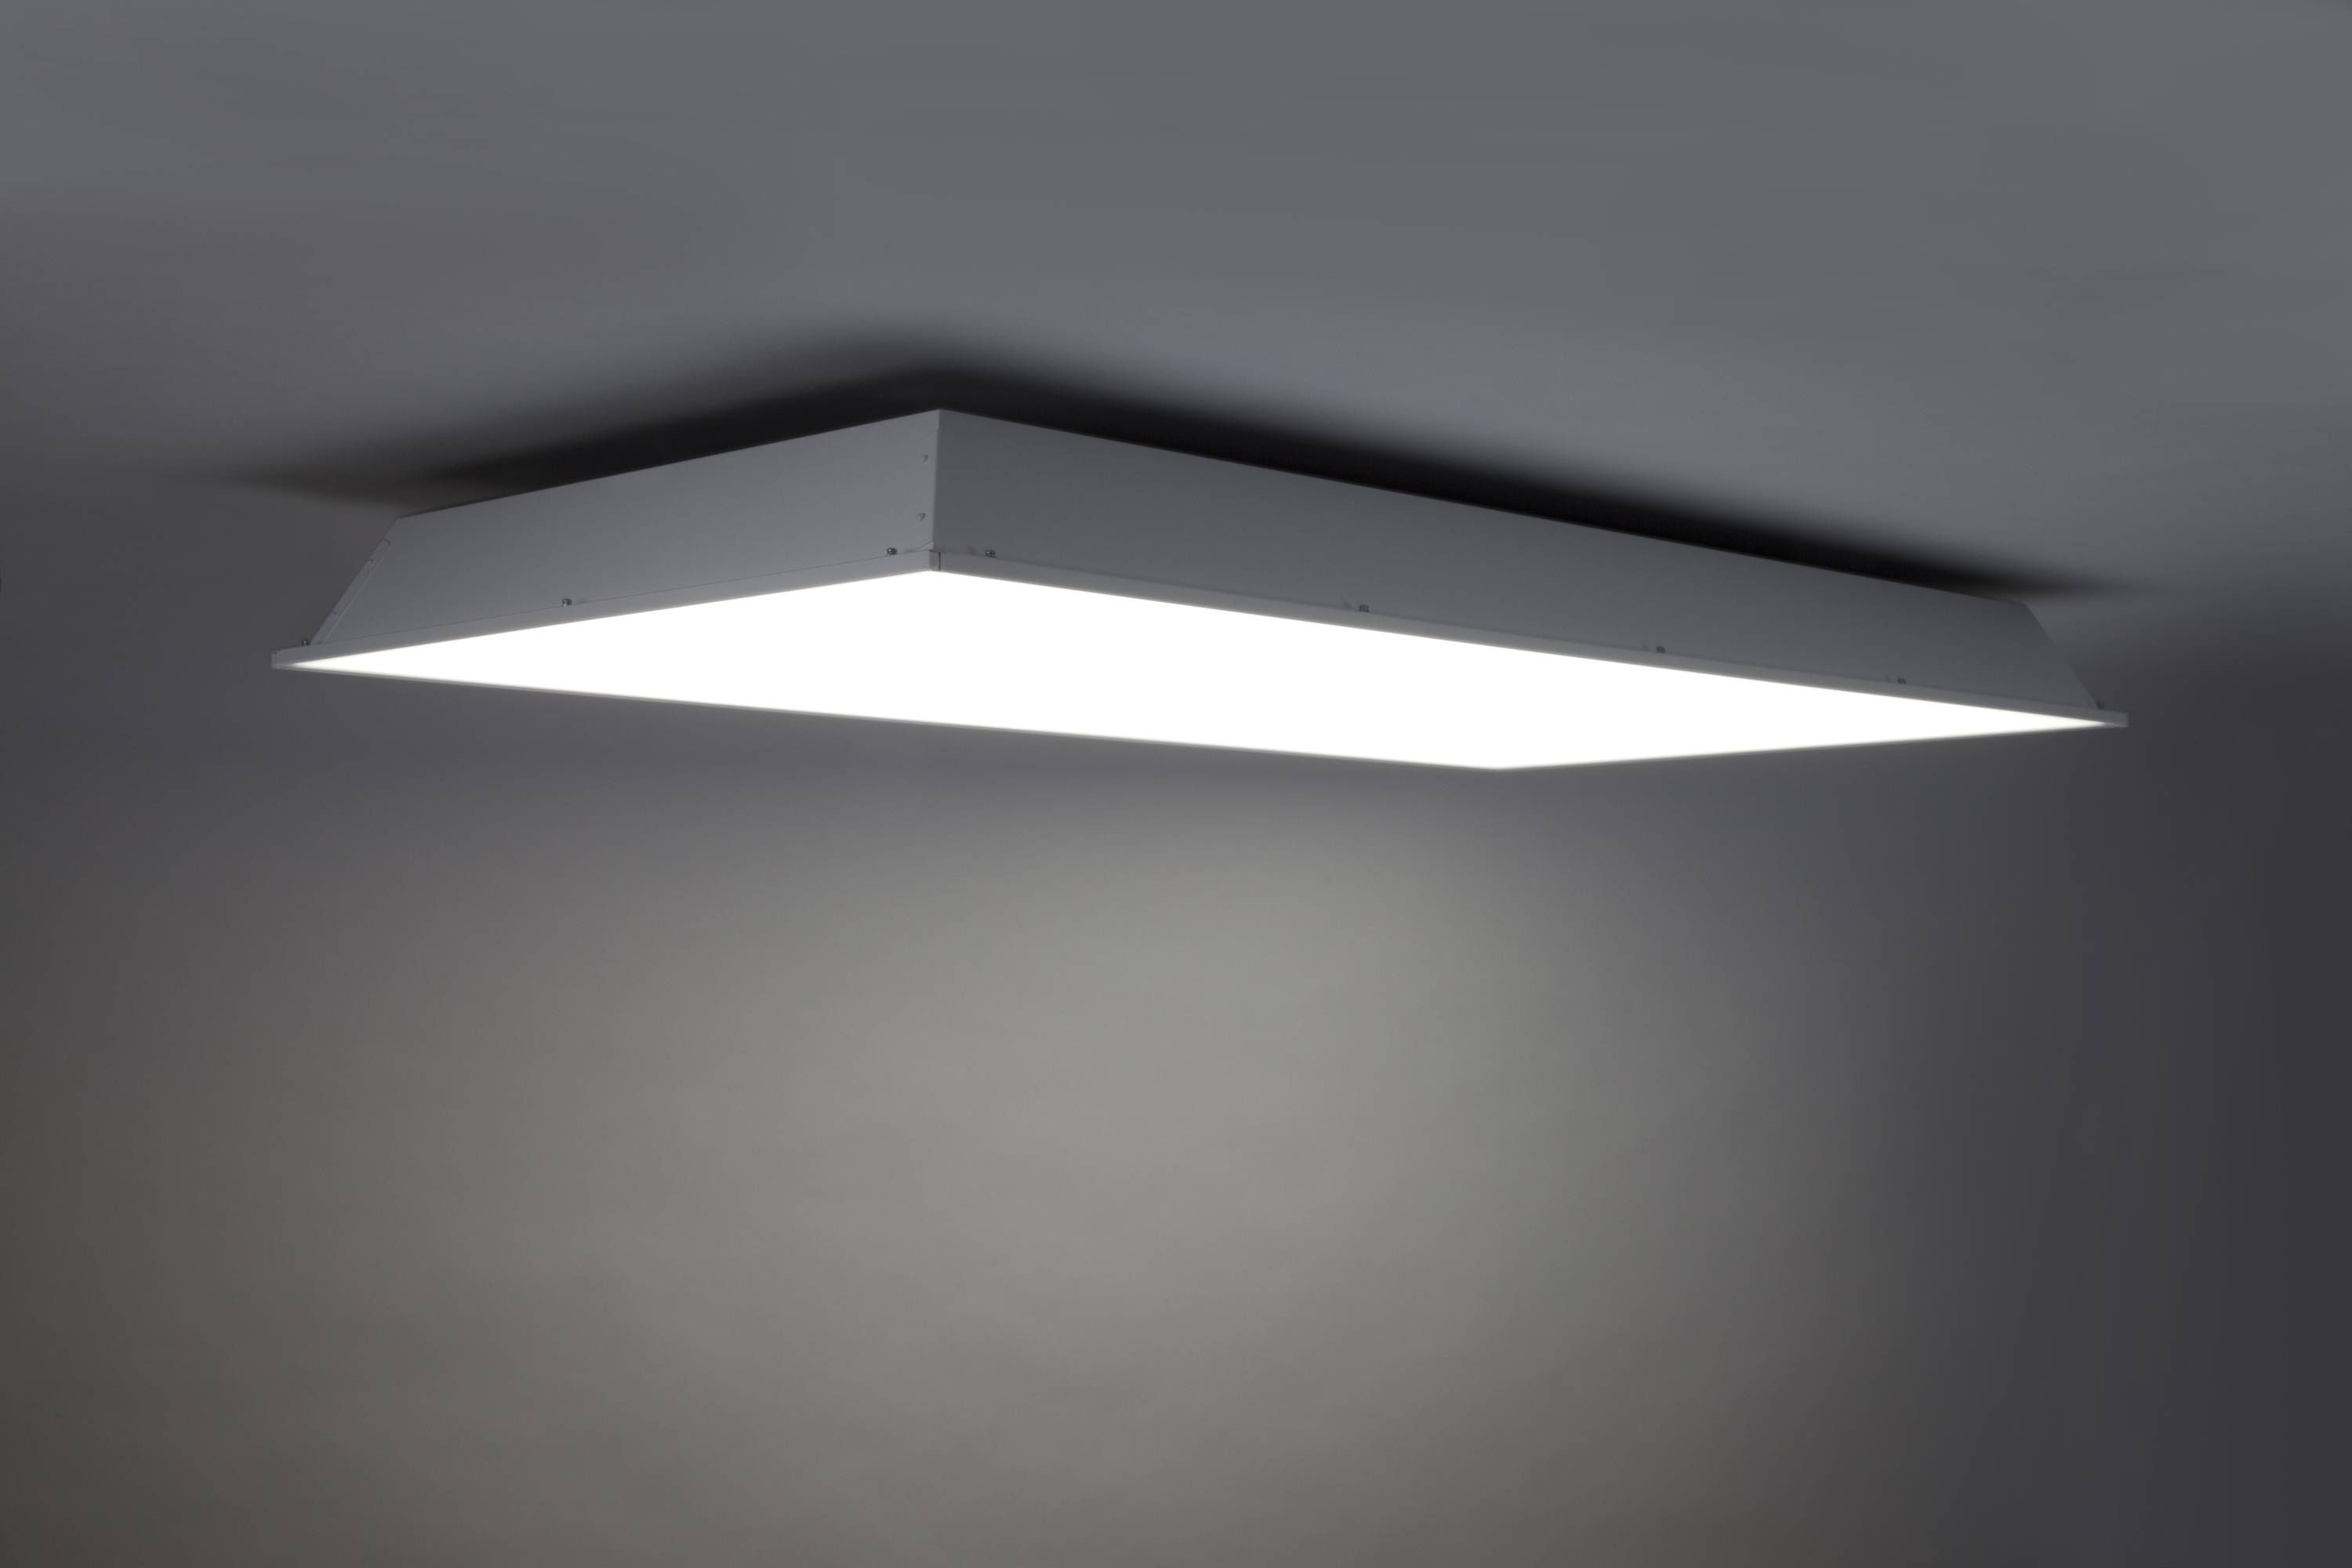 Reasons To Install Commercial Led Ceiling Lights | Warisan Lighting With Regard To Commercial Hanging Lights Fixtures (View 4 of 15)